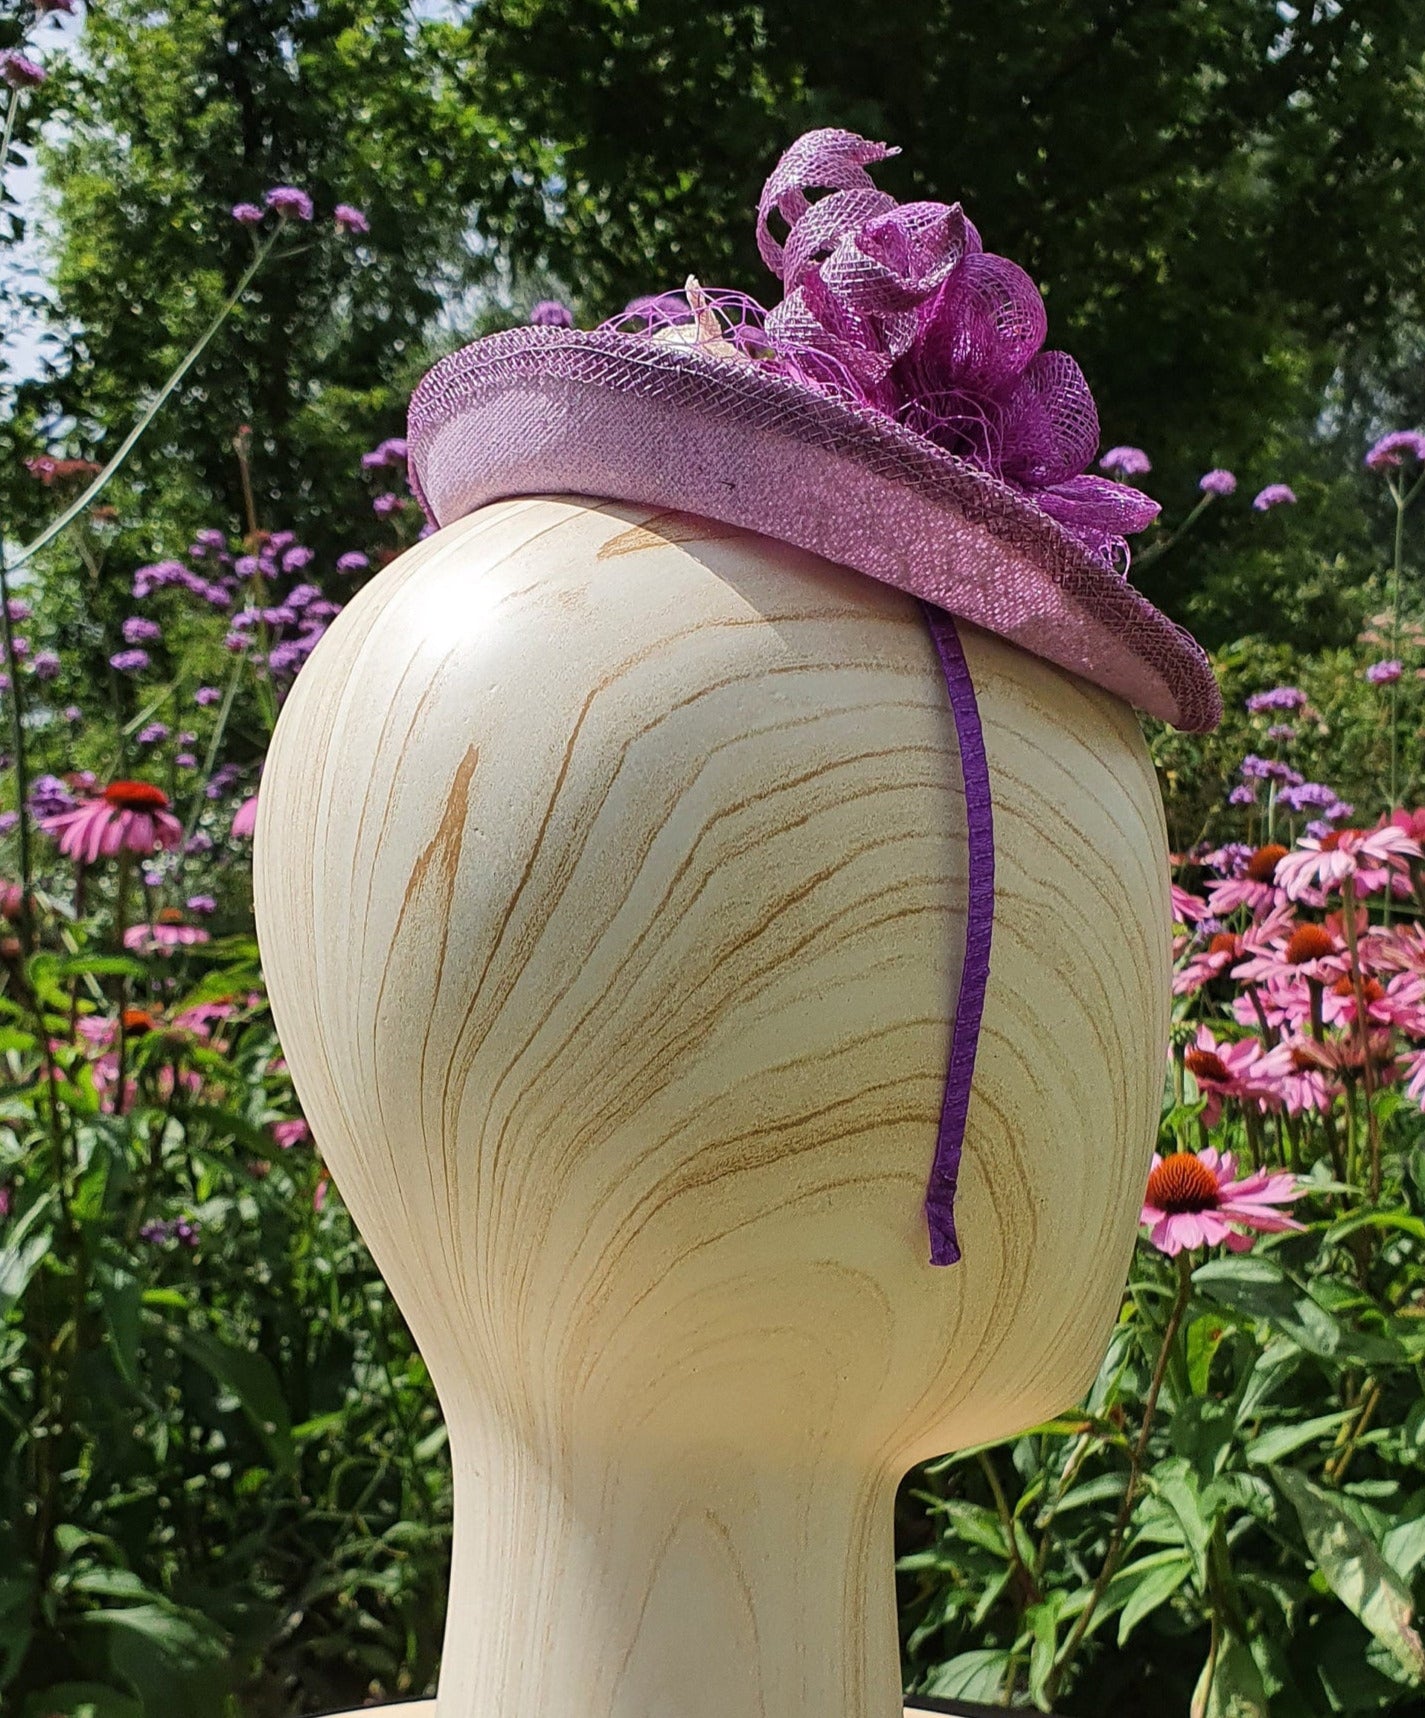 Handmade purple oval fascinator from Sinamay with pink and purple feathers and bows